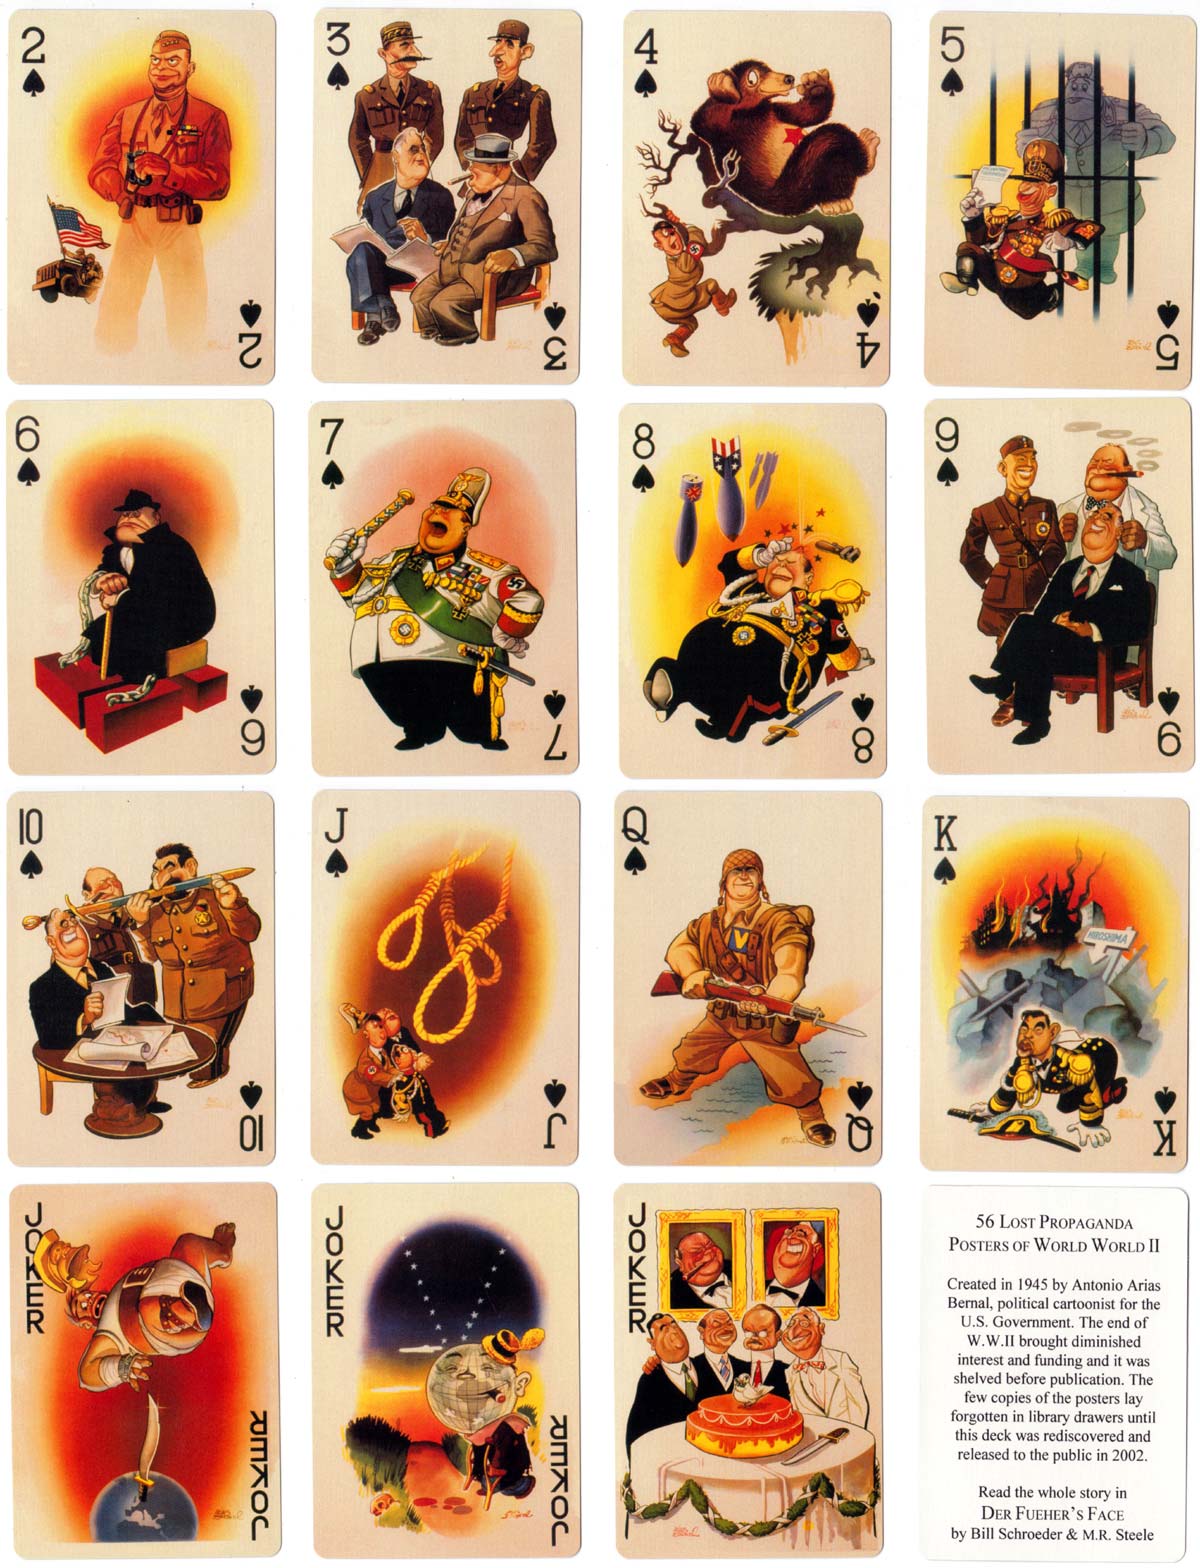 “In der Fuehrer’s Face” playing cards designed in 1943-45 by Antonio Arias Bernal